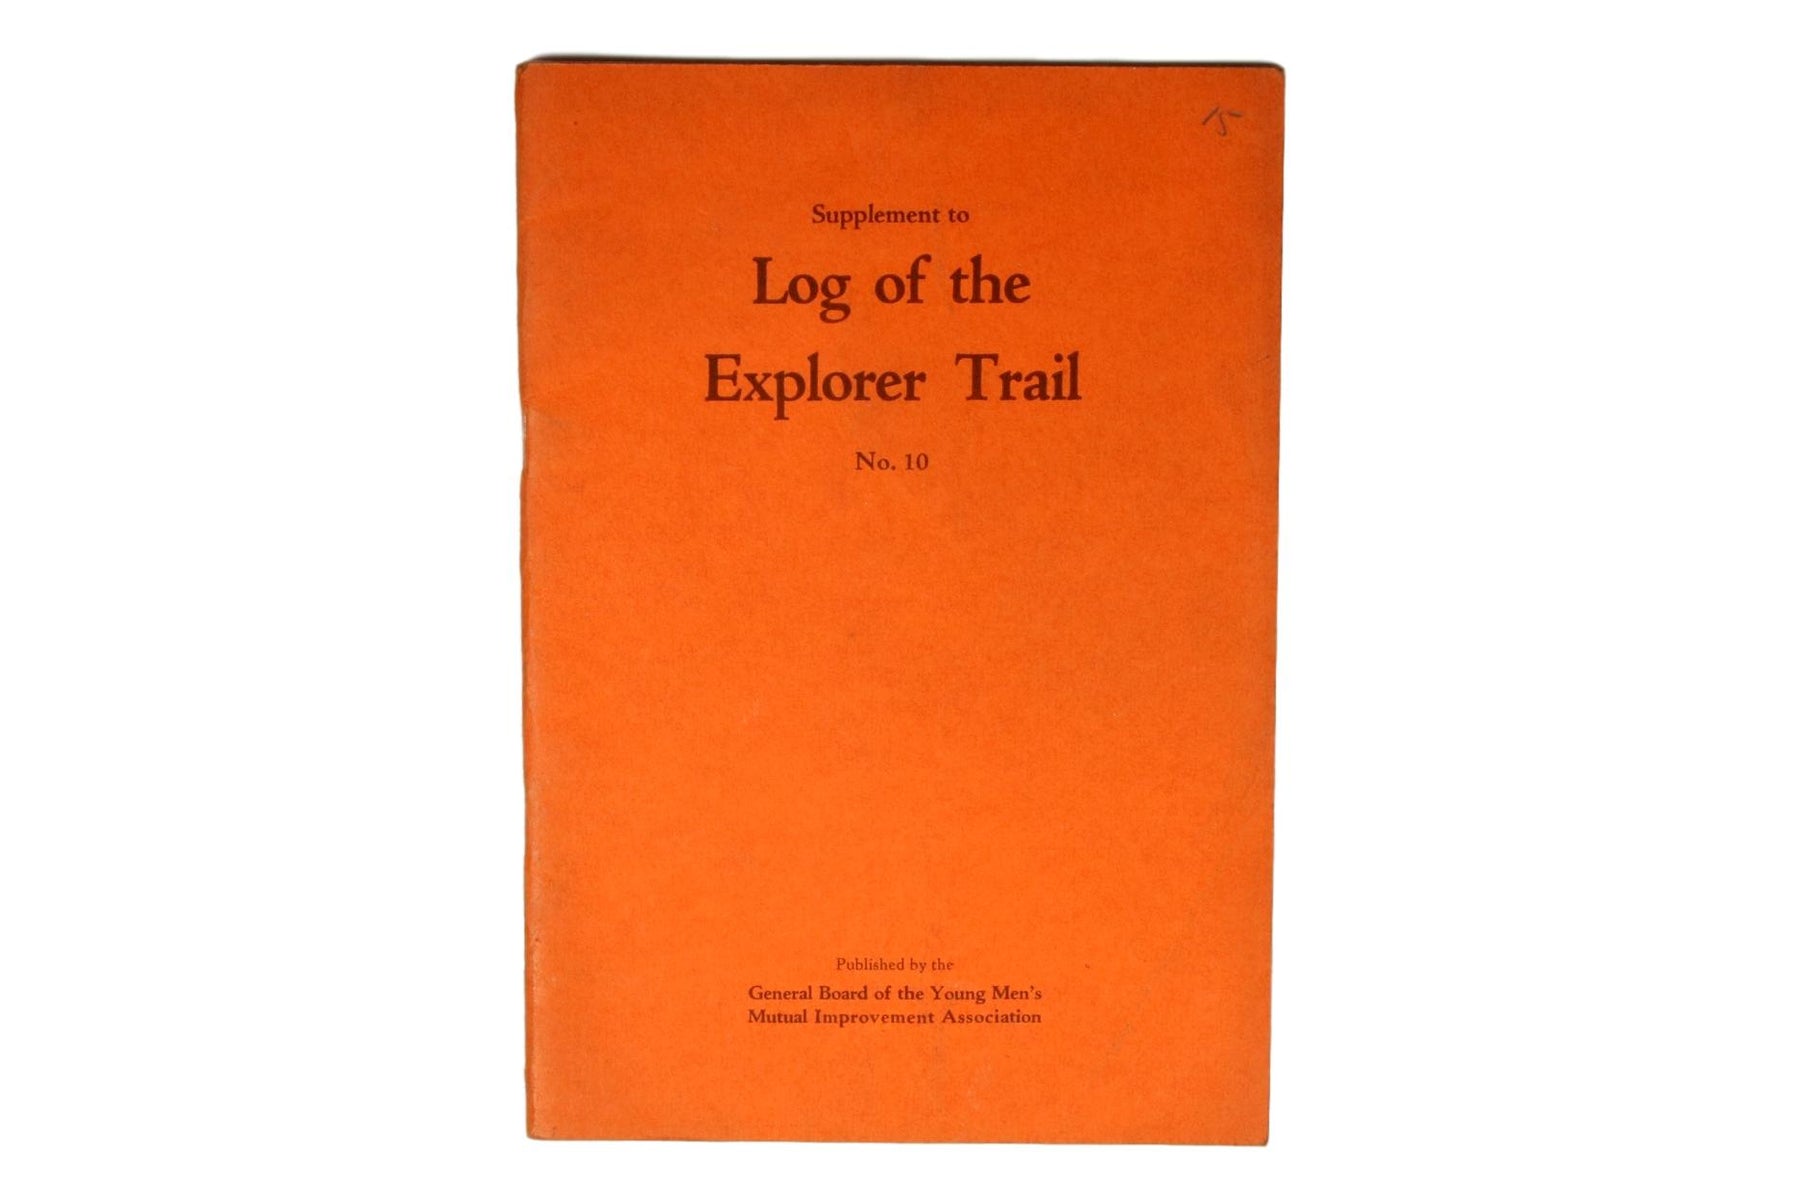 Log of the Explorer Trail Supplement